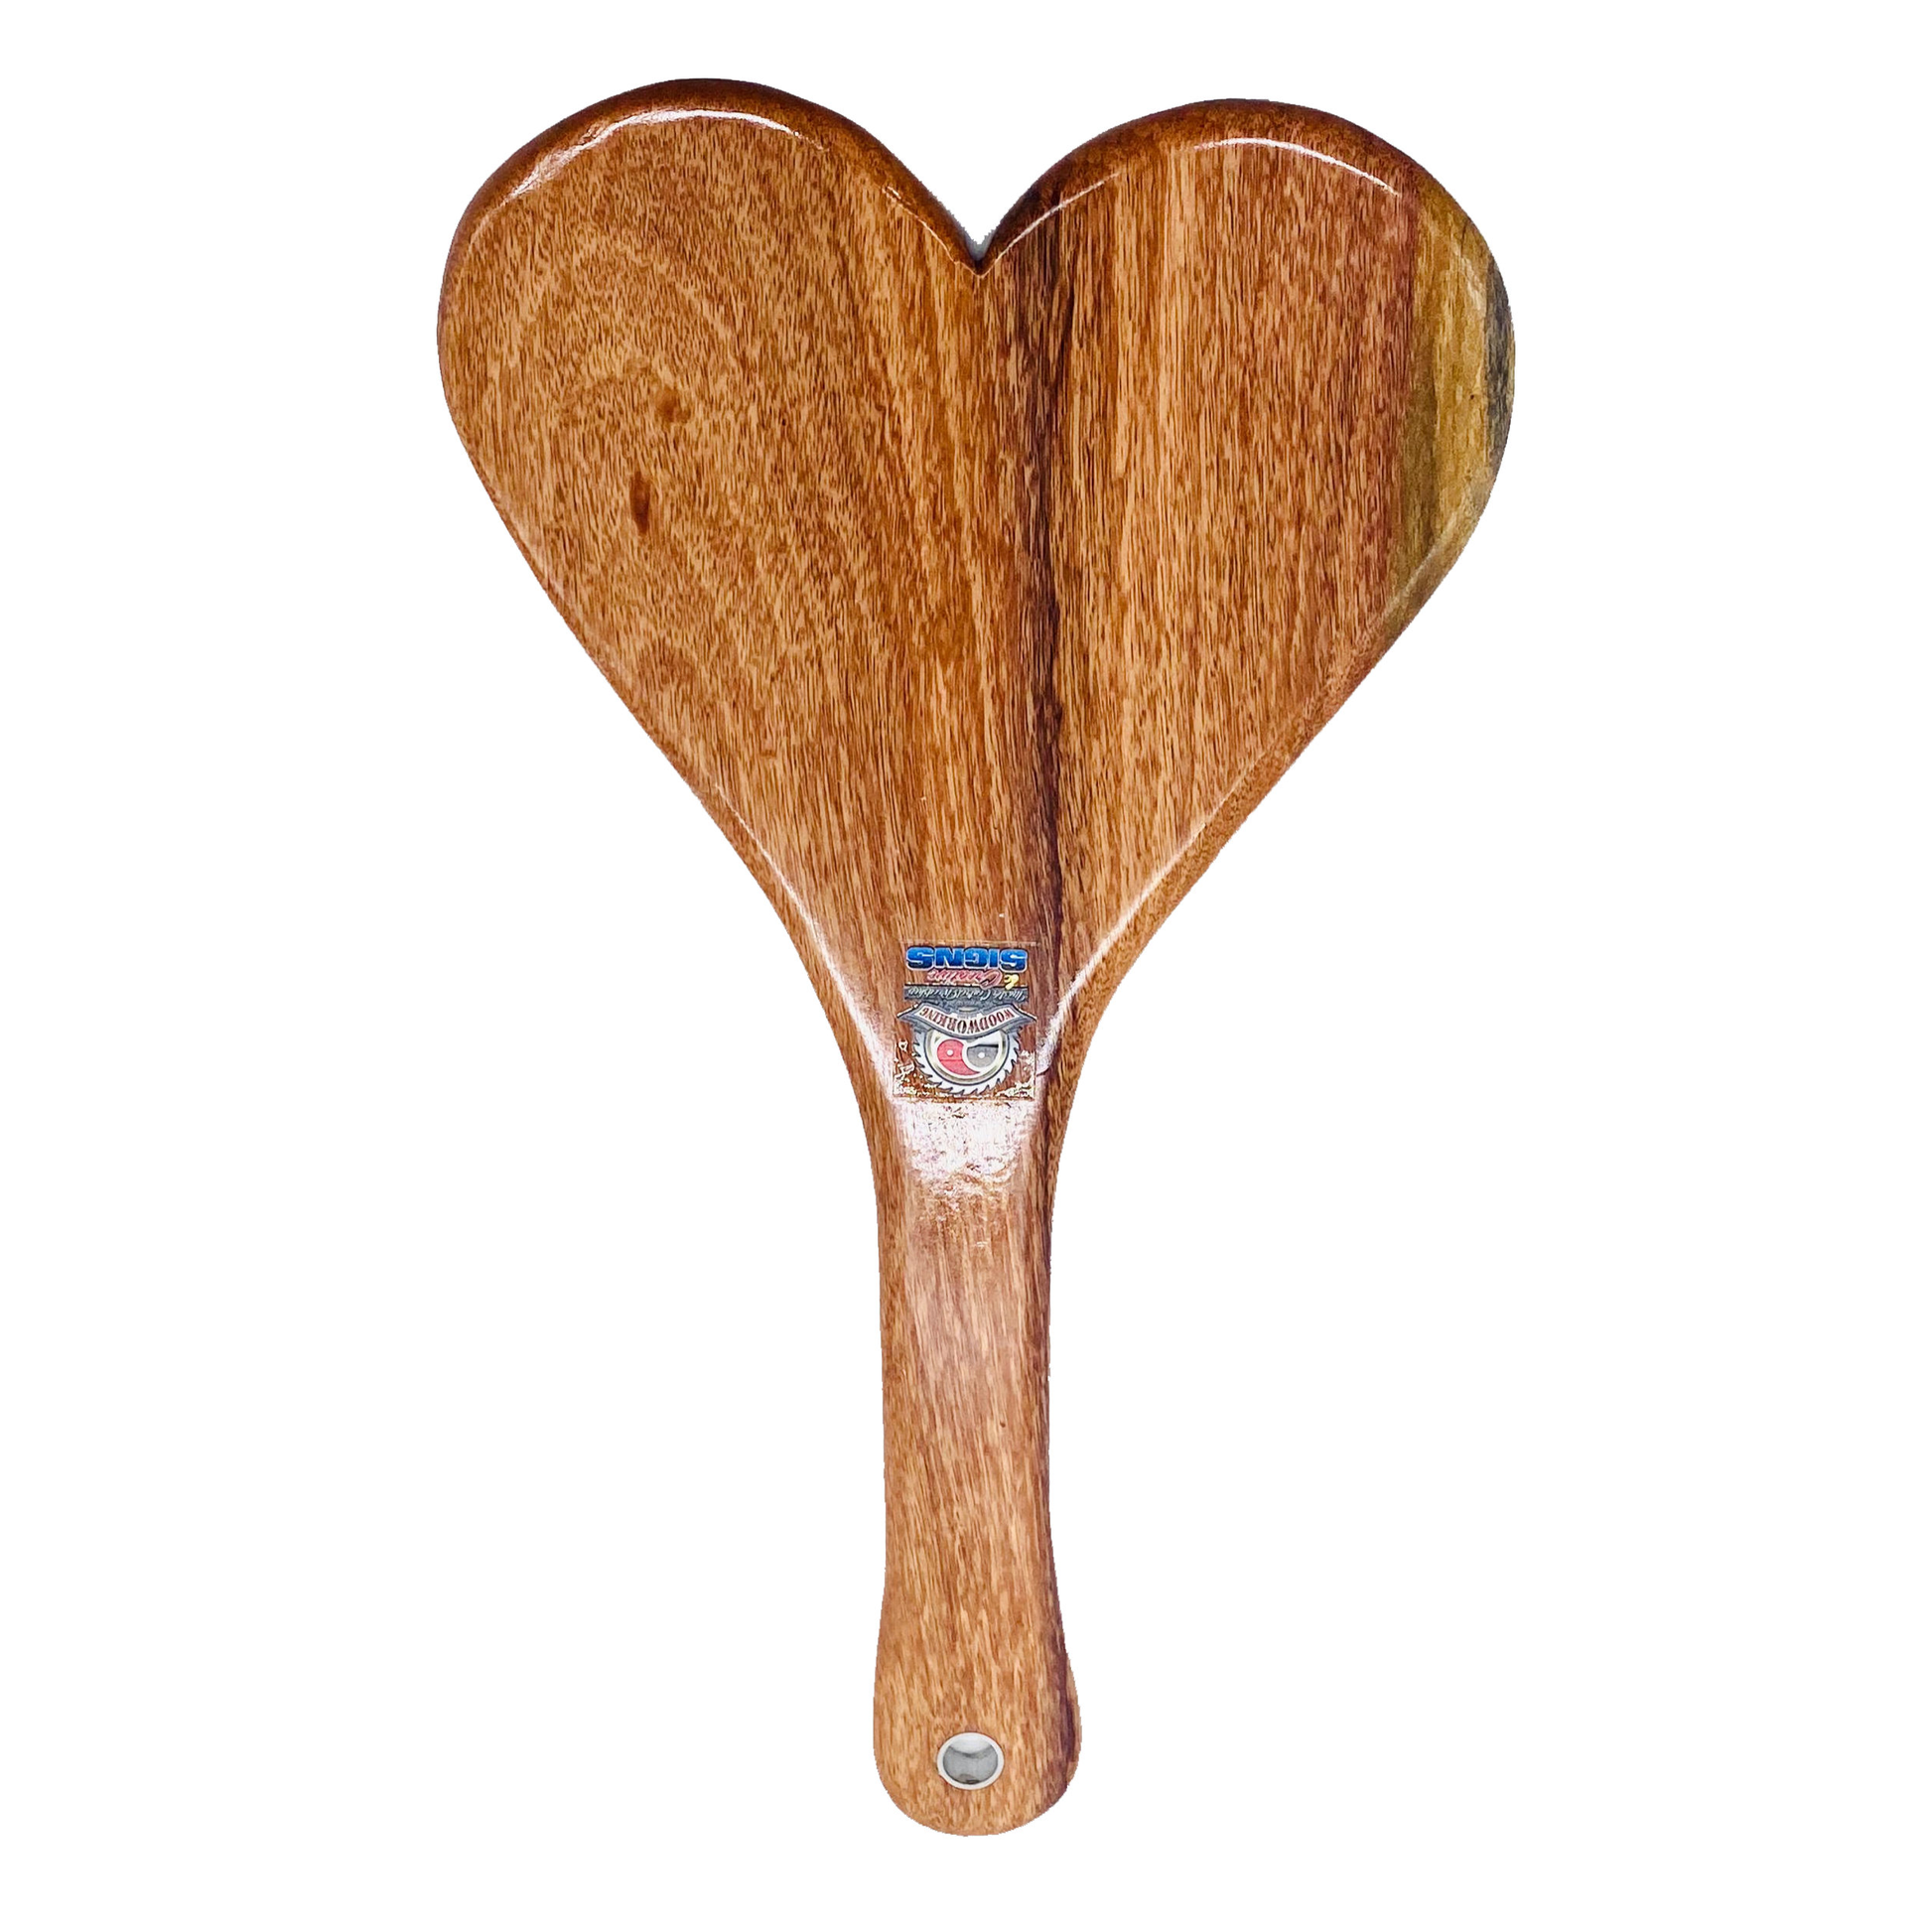 13 Best Spanking Paddles for Sex - How To Use Spanking Paddles